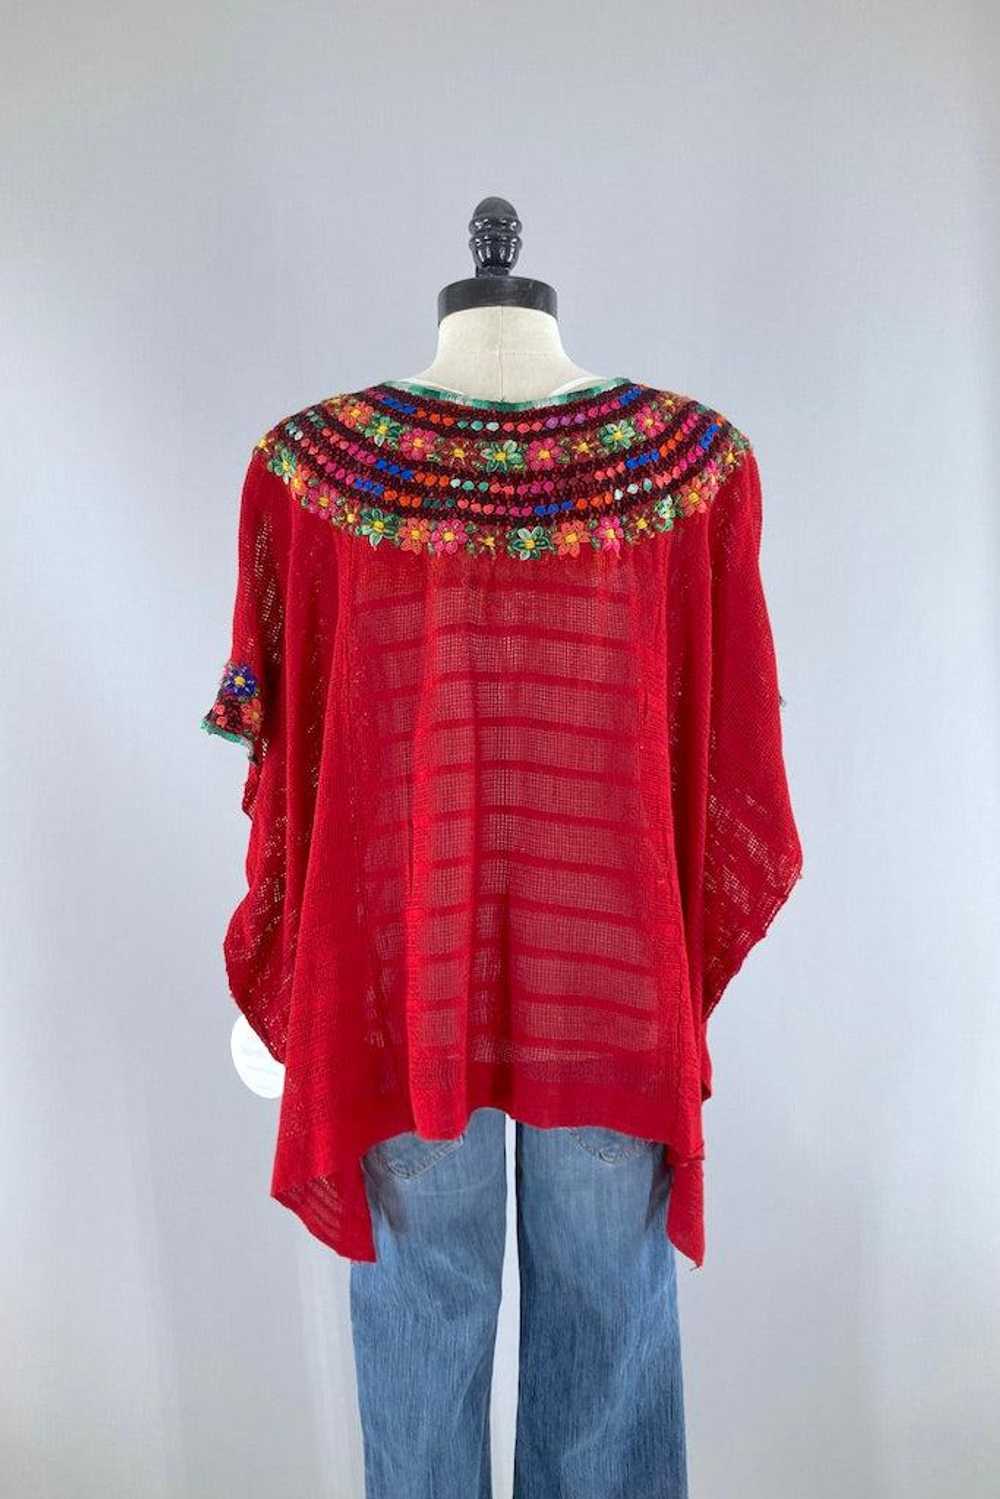 Vintage Embroidered Cotton Tunic - image 6